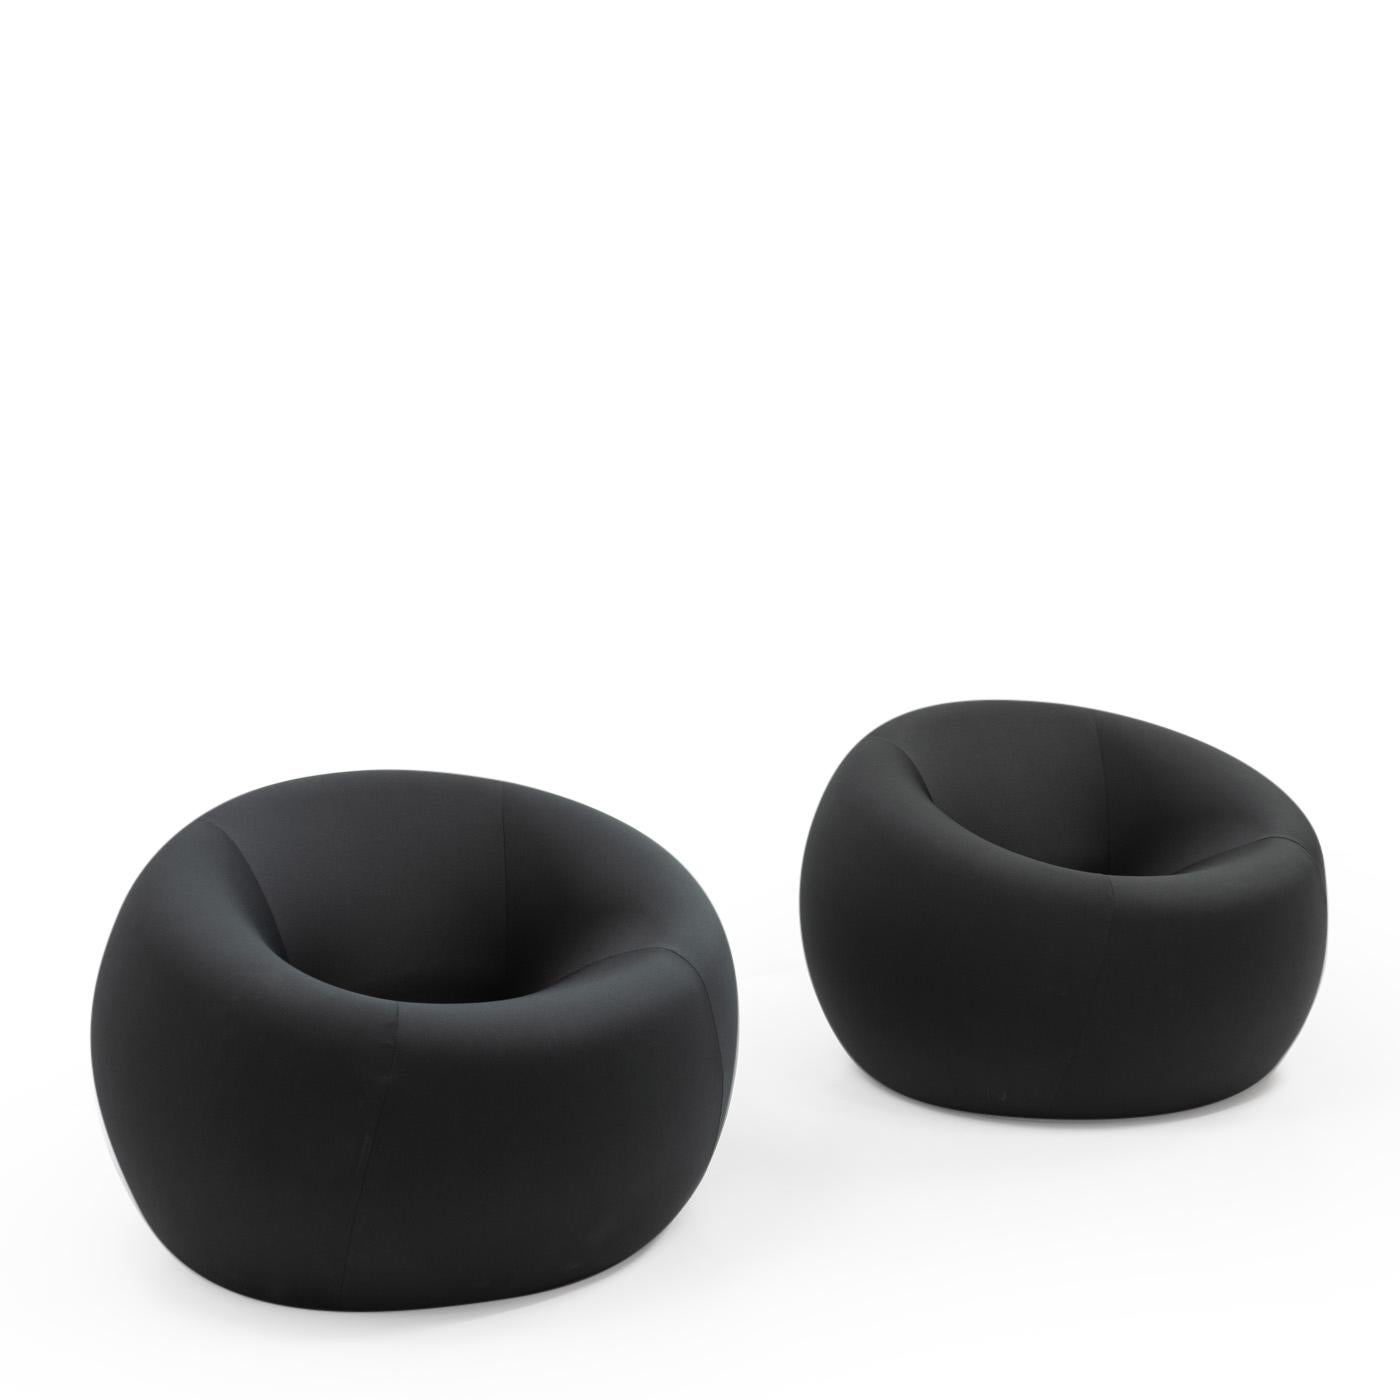 UP1 Lounge Chairs, designed  in 1969 by Gaetano Pesce for C&B Italia (now B&B Italia):

These lounge chairs are known for their distinctive, sculptural round form, and due to their structure being completely built up from polyurethane foam, they are